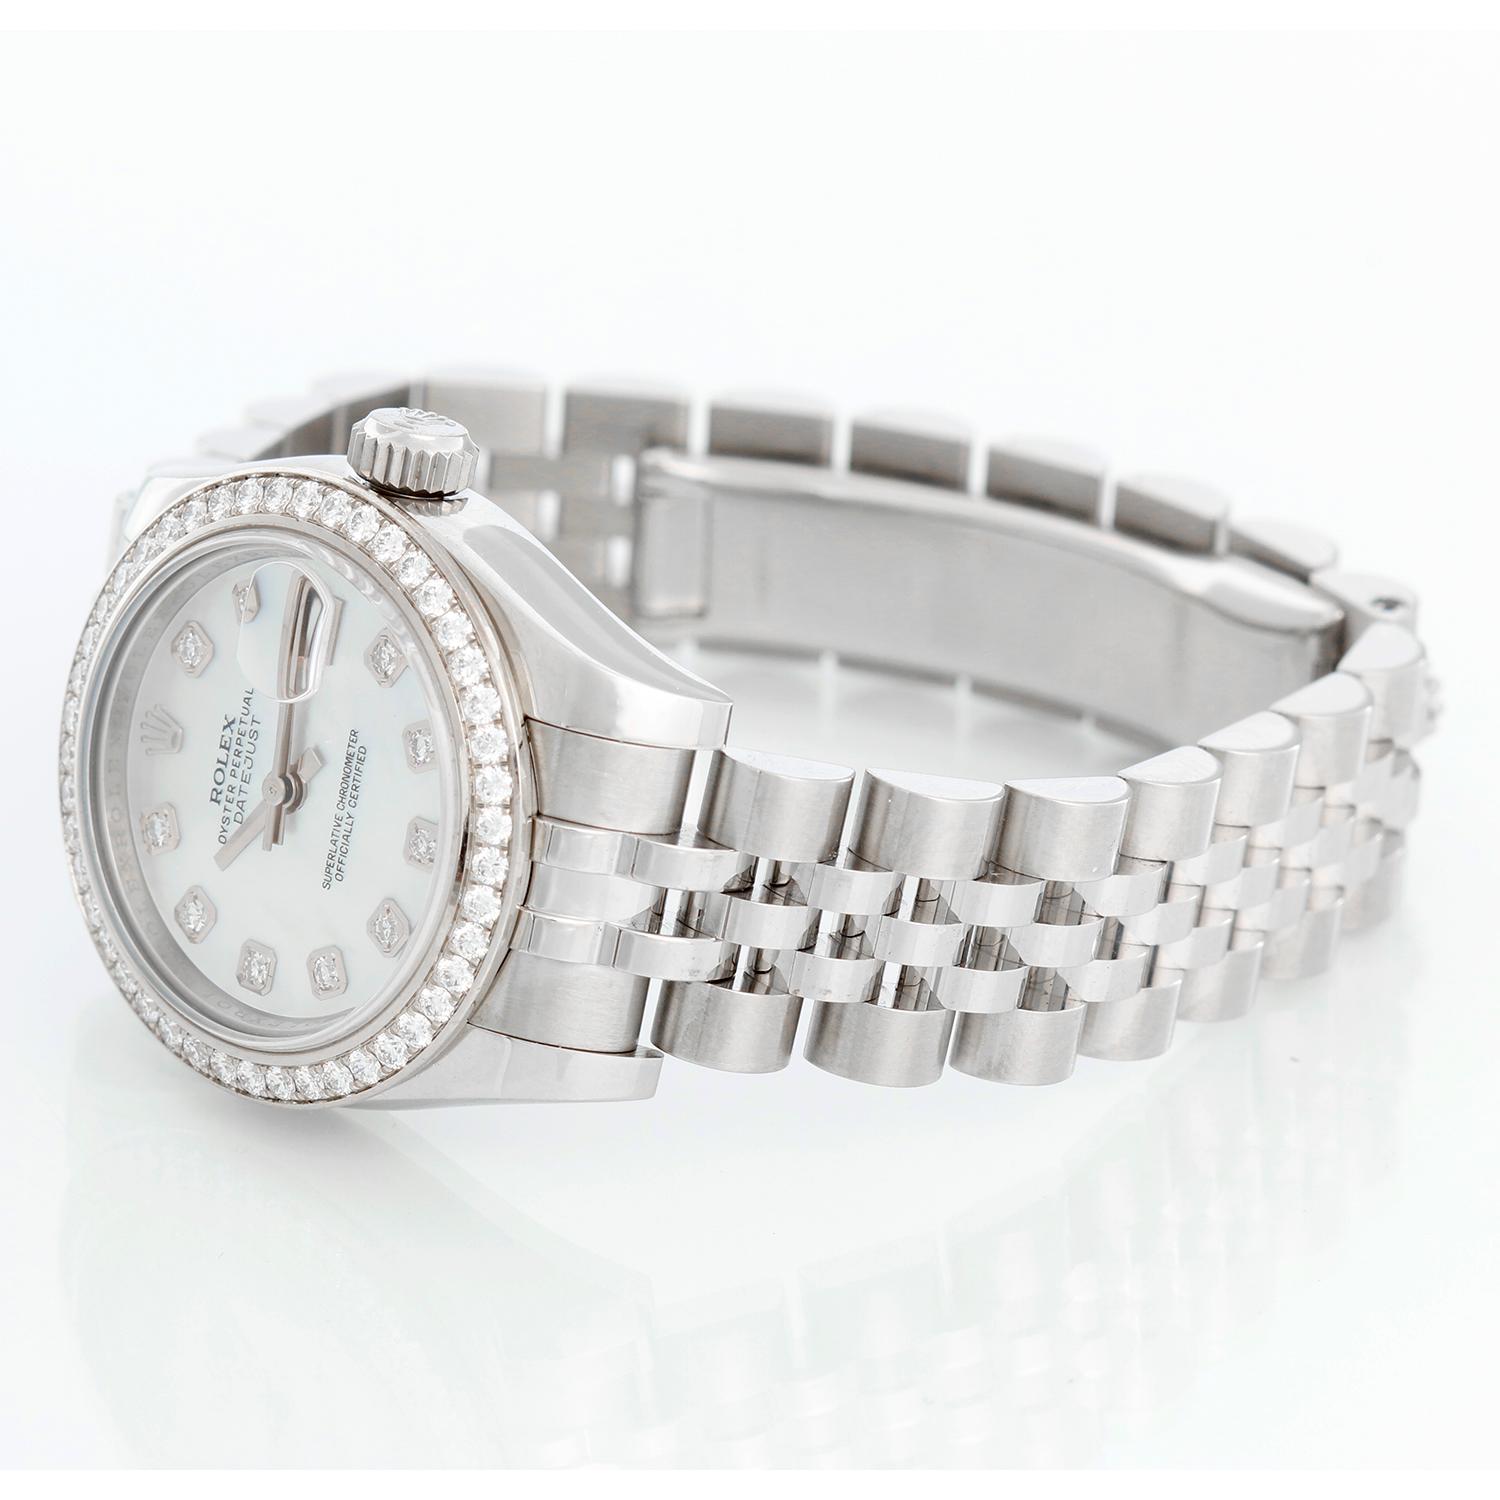 Rolex Ladies Datejust Stainless Steel Watch 179384 - Automatic winding, Quickset, 31 jewels, sapphire crystal. Stainless steel case with diamond bezel ( 26 mm). White Mother of Pearl with 10 diamonds. Stainless steel Jubilee bracelet. Pre-owned with